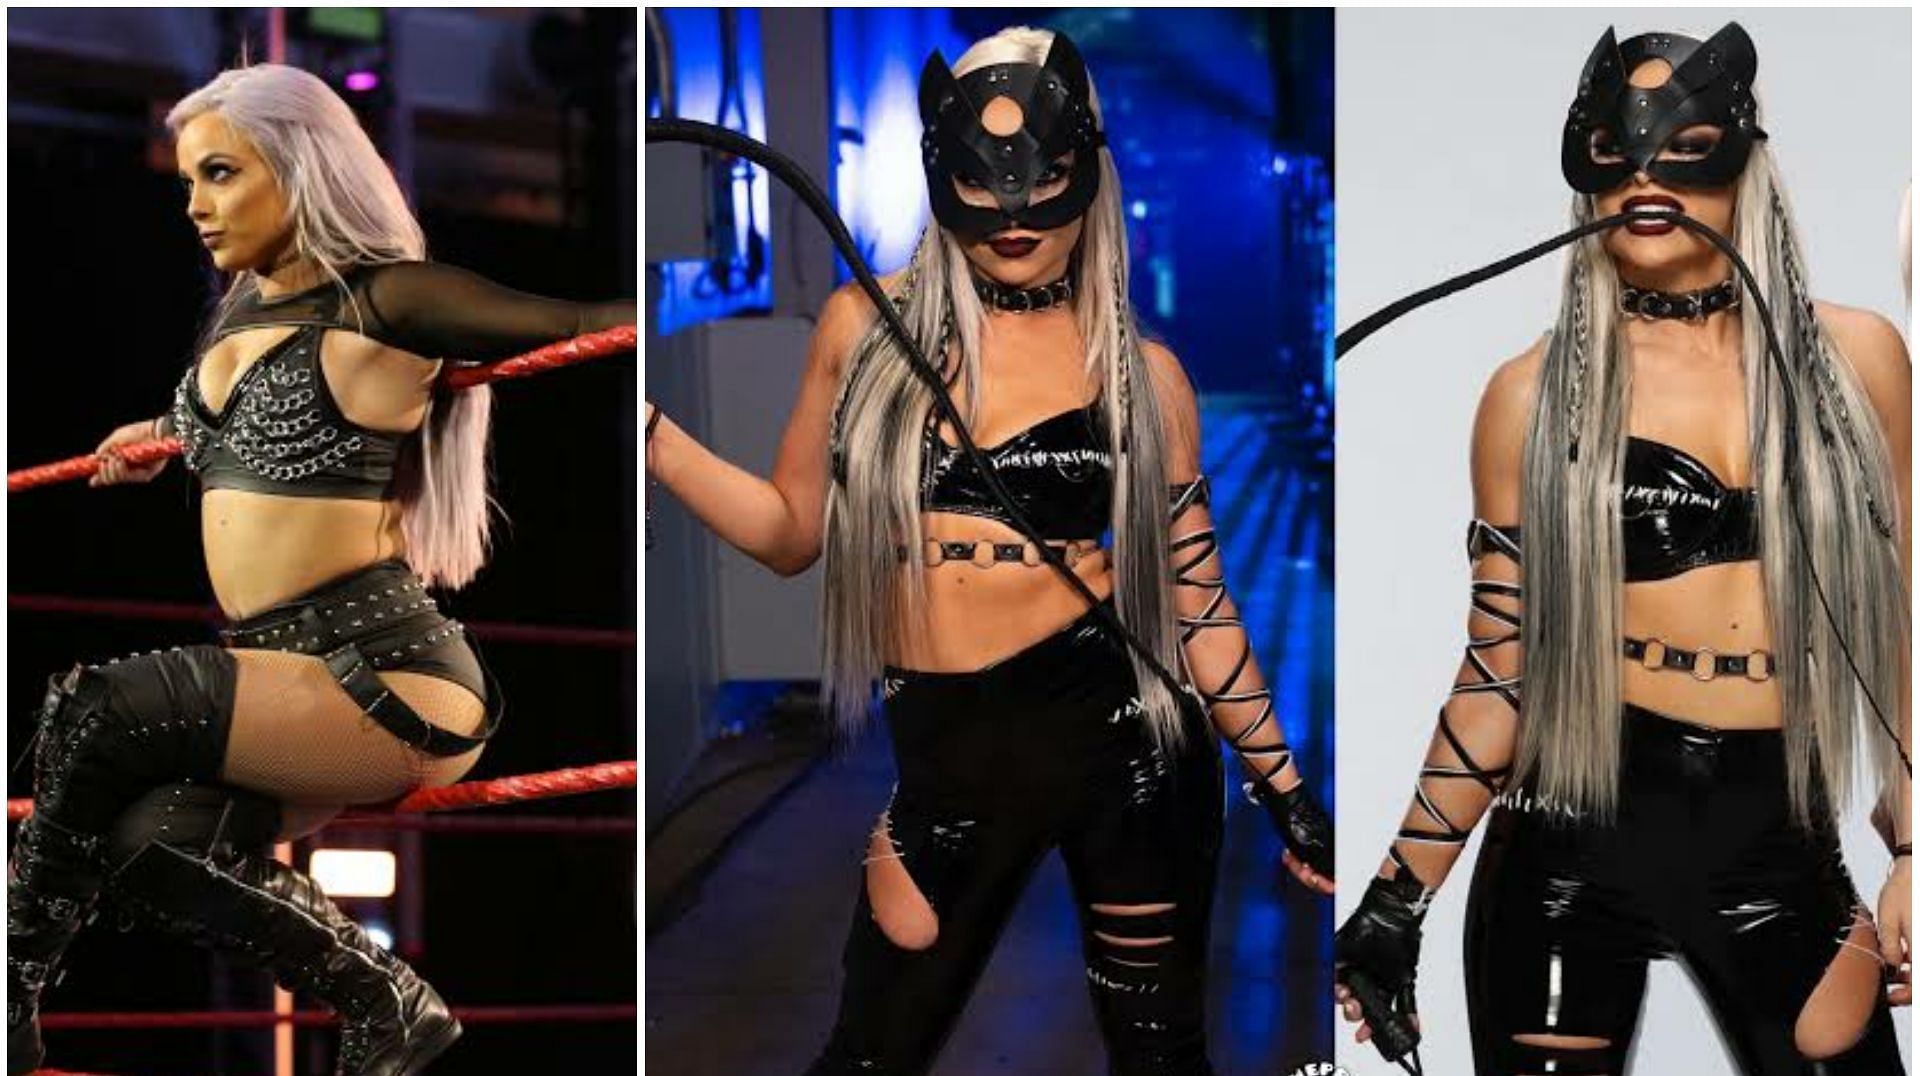 Liv Morgan is in a relationship with a former WWE star